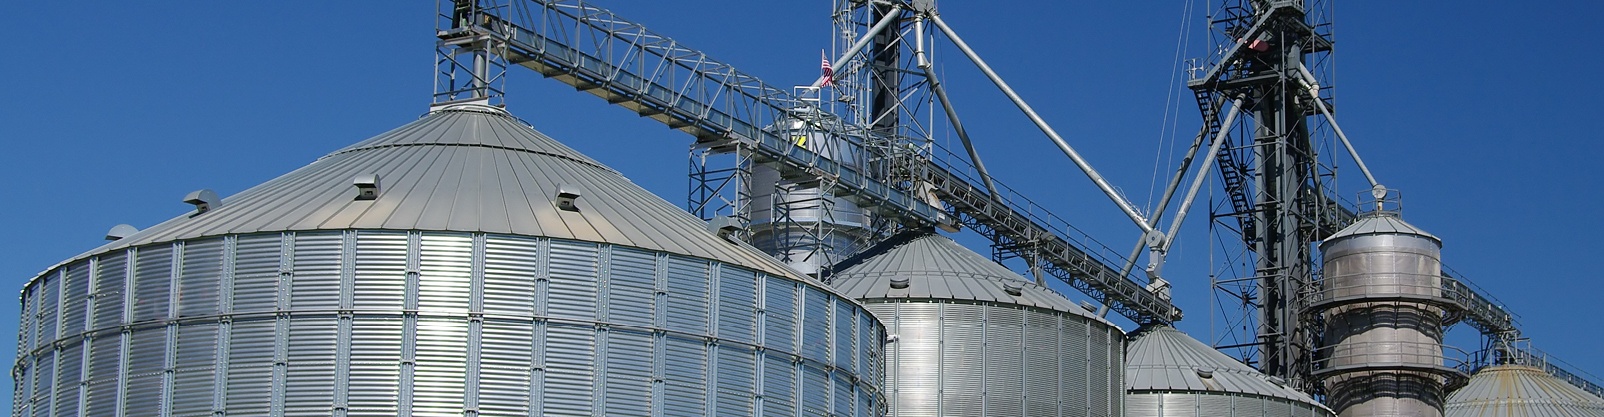 Getting the Right Grain Dryer Shed For Your Farm